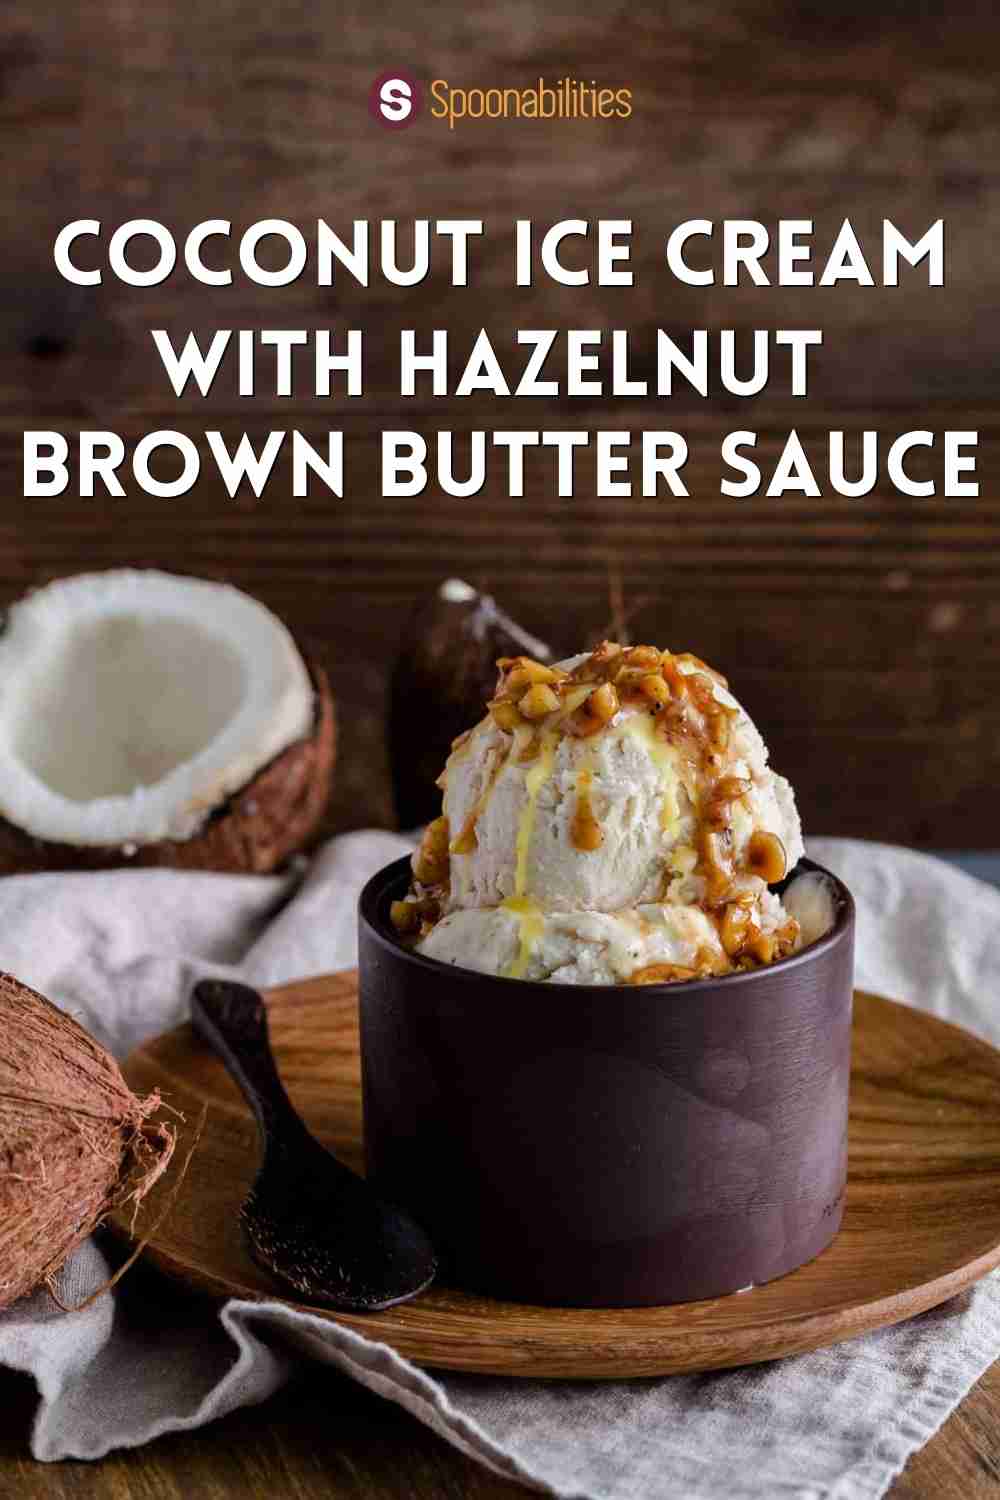 Coconut Ice Cream with Hazelnut Brown Butter Sauce